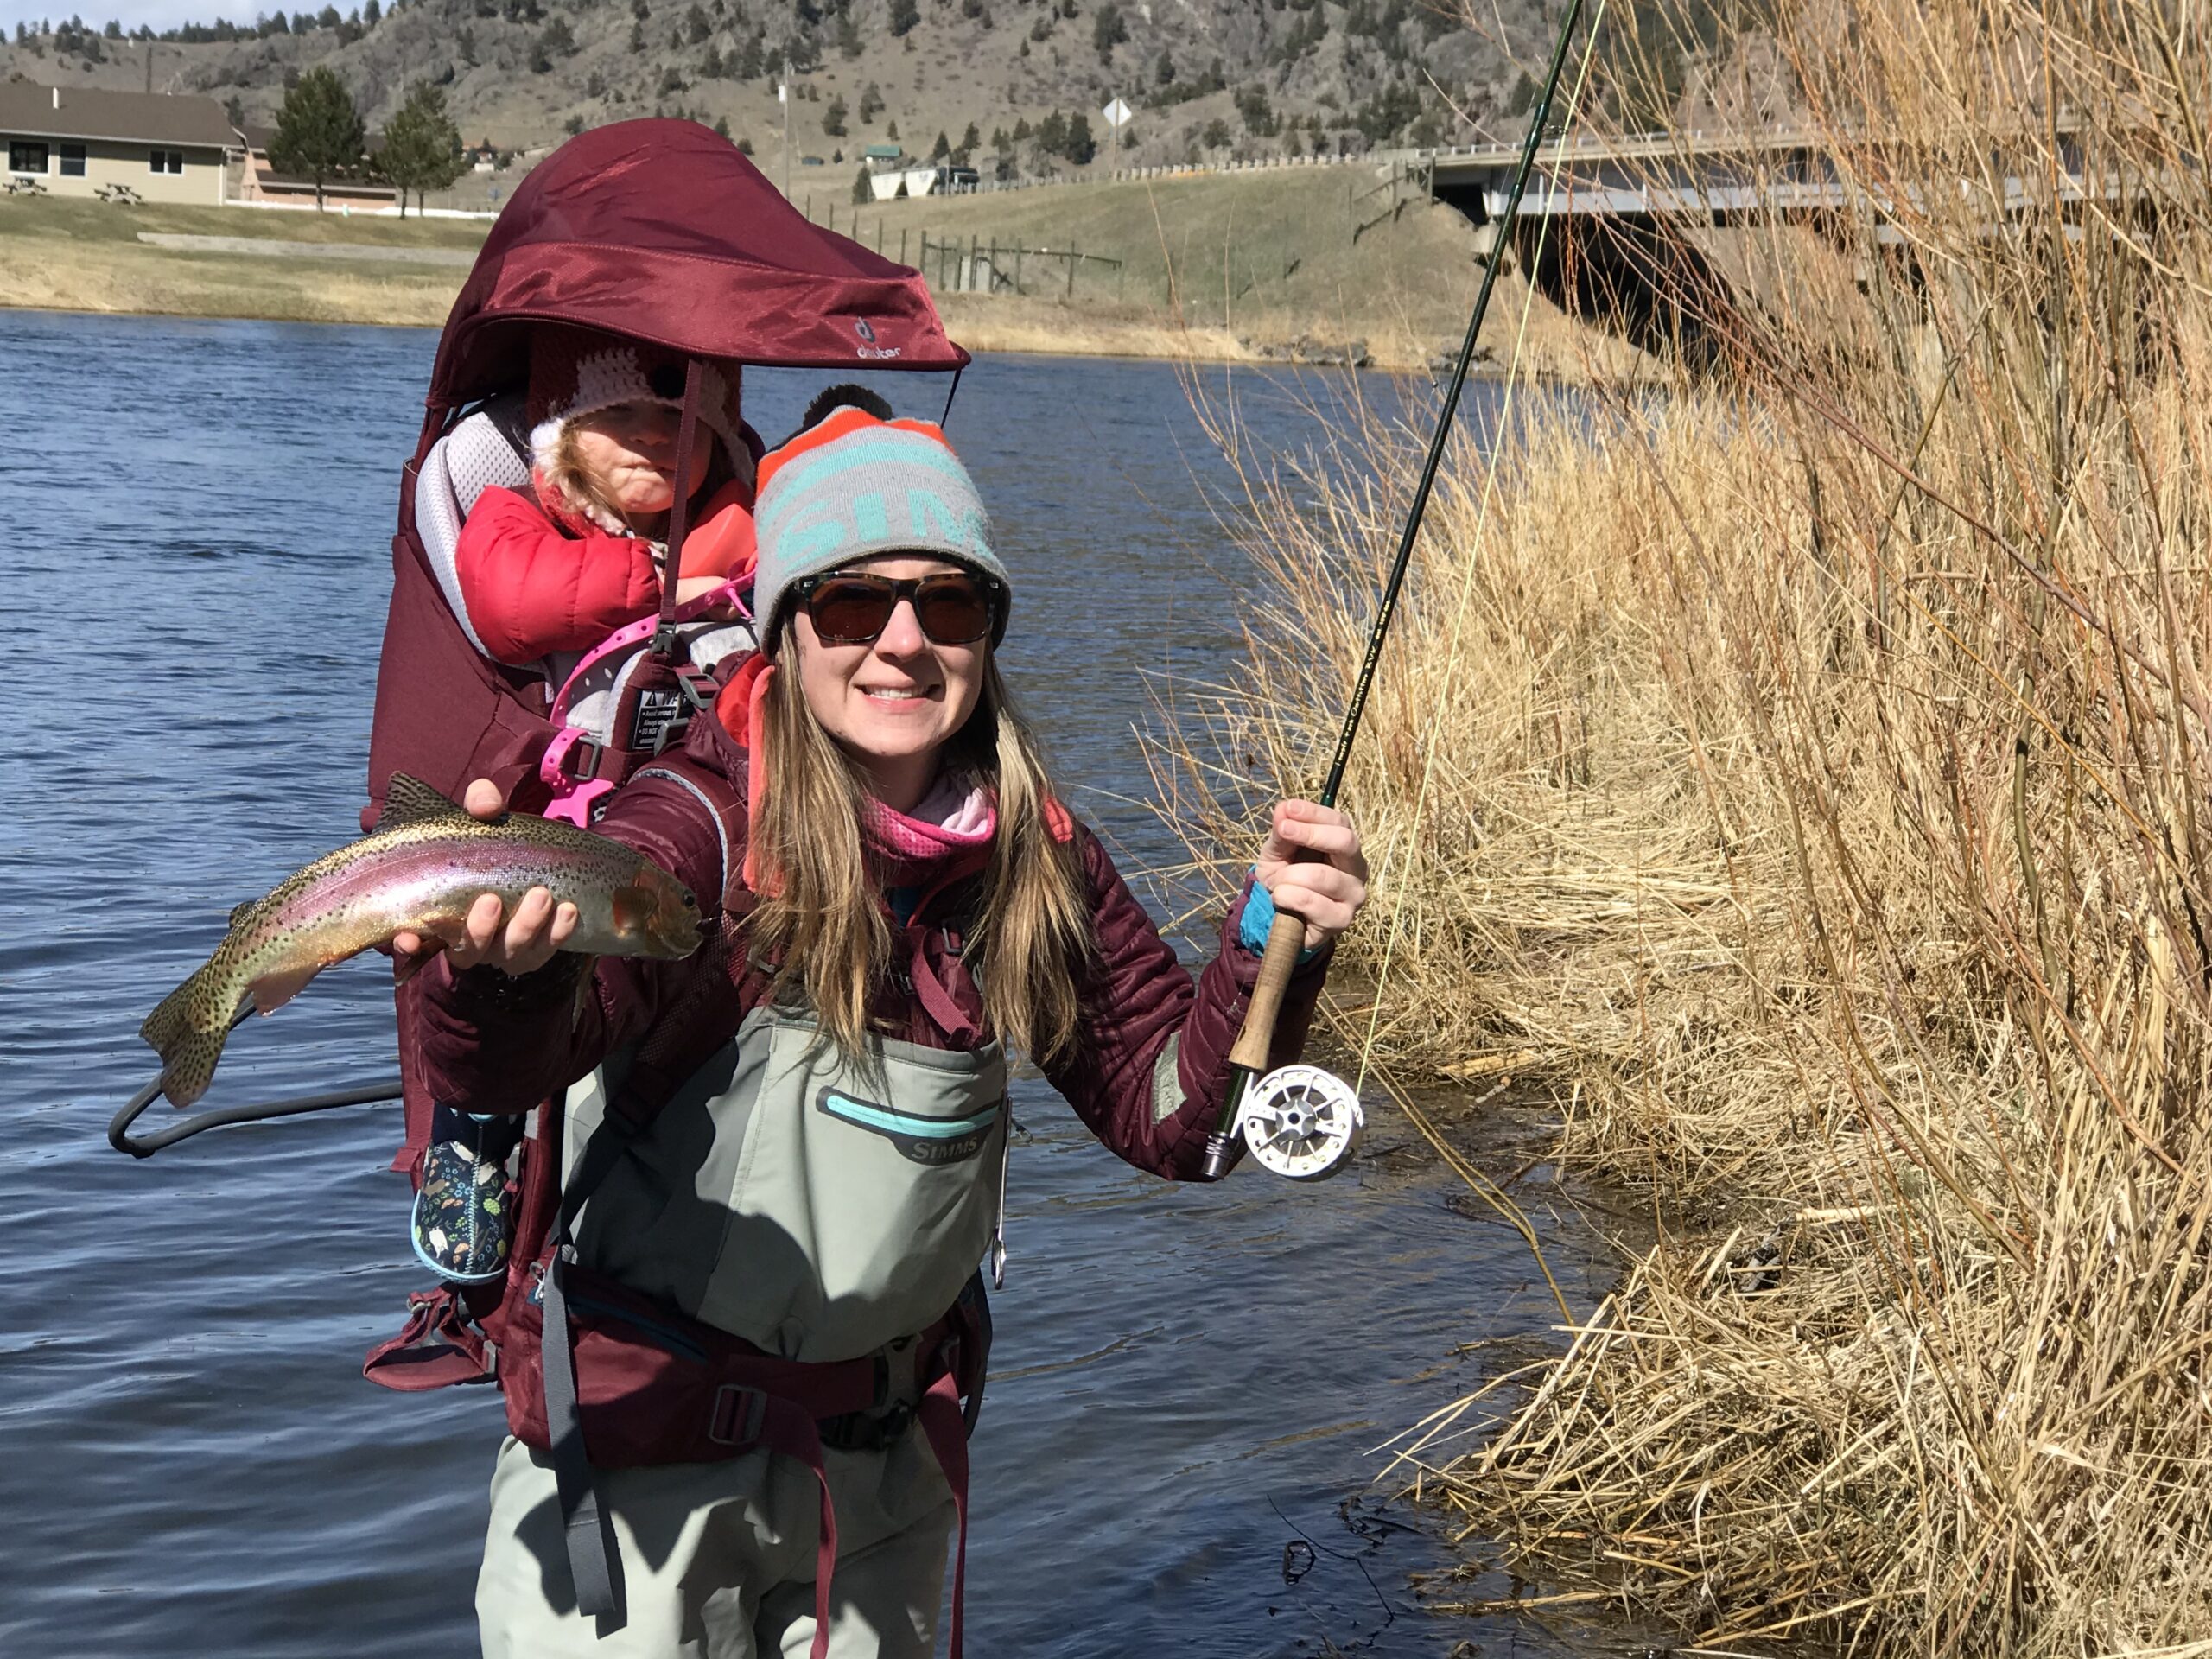 A woman fishing with a toddler in a red backpack